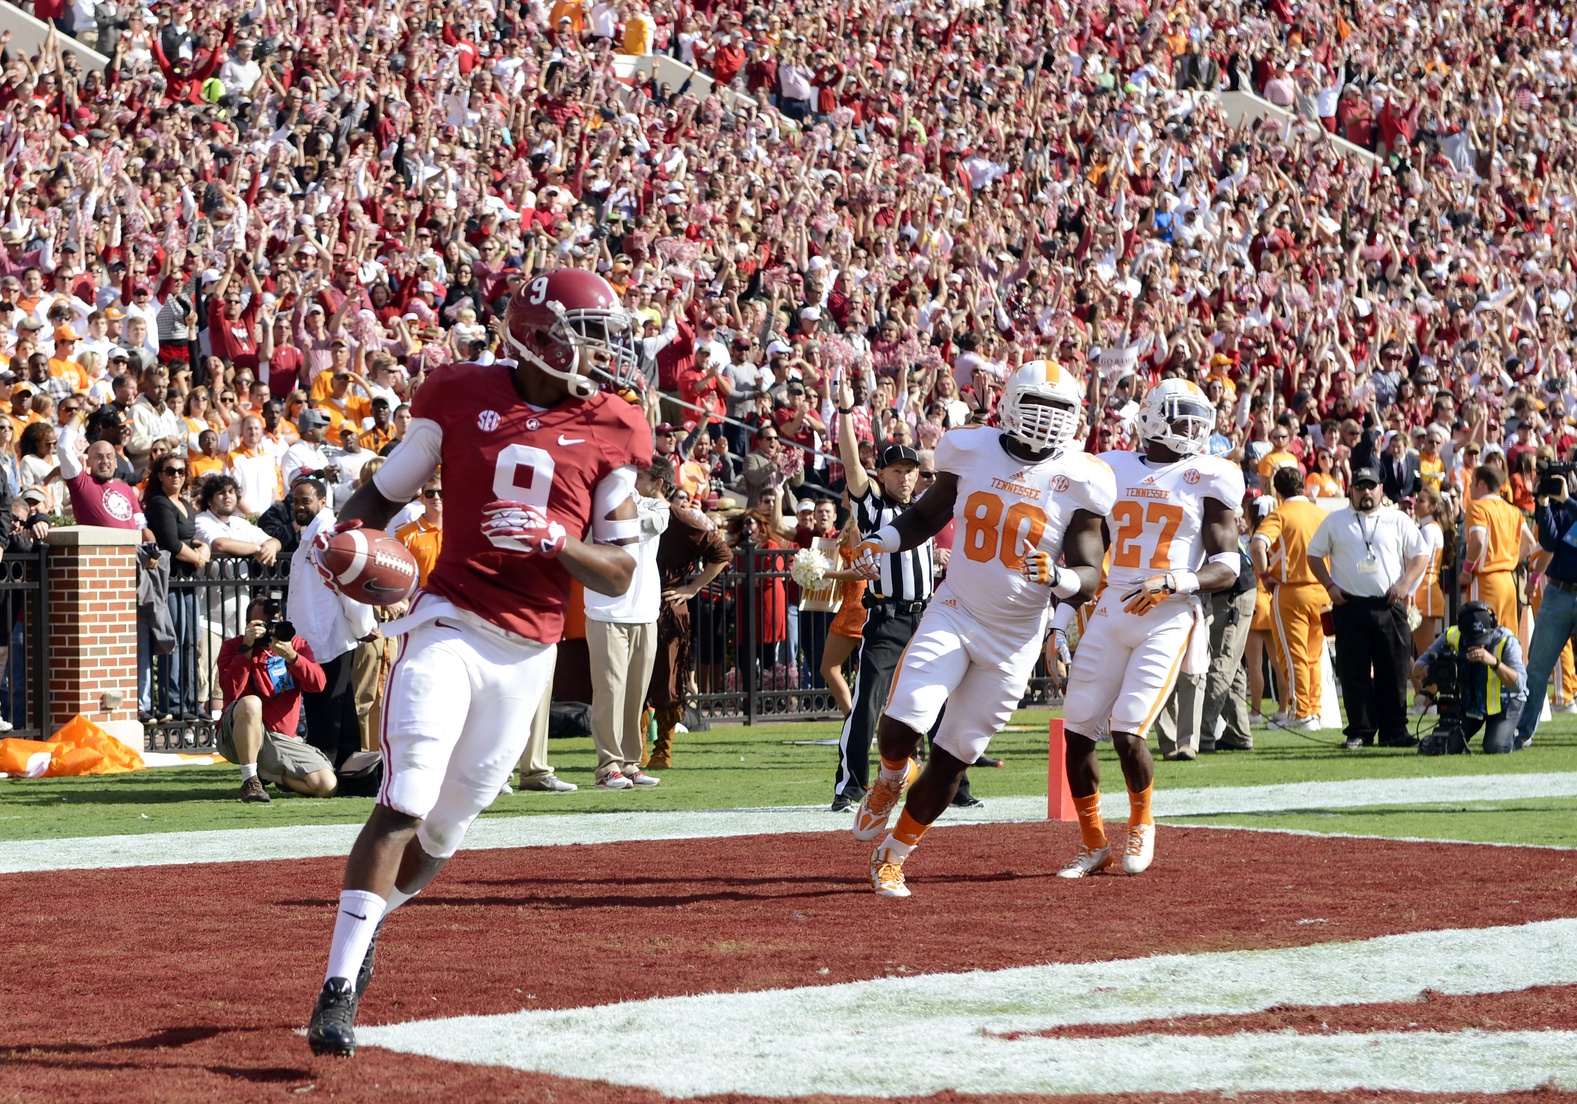 Oct 26, 2013; Tuscaloosa, AL, USA; Alabama Crimson Tide wide receiver Amari Cooper (9) enters the end zone on his 54-yard touchdown against the Tennessee Volunteers during the first quarter at Bryant-Denny Stadium. Mandatory Credit: John David Mercer-USA TODAY Sports